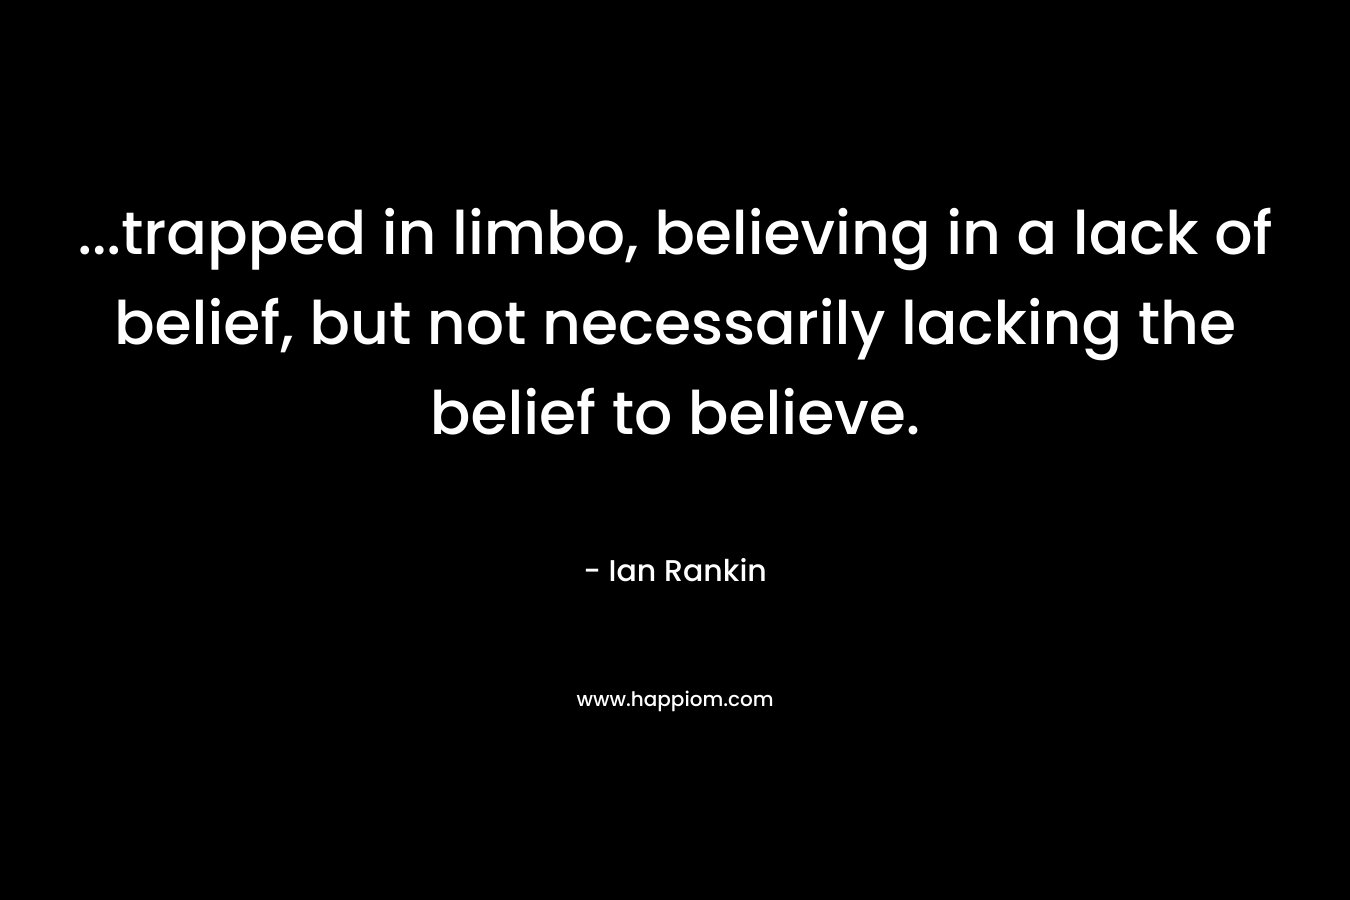 ...trapped in limbo, believing in a lack of belief, but not necessarily lacking the belief to believe.